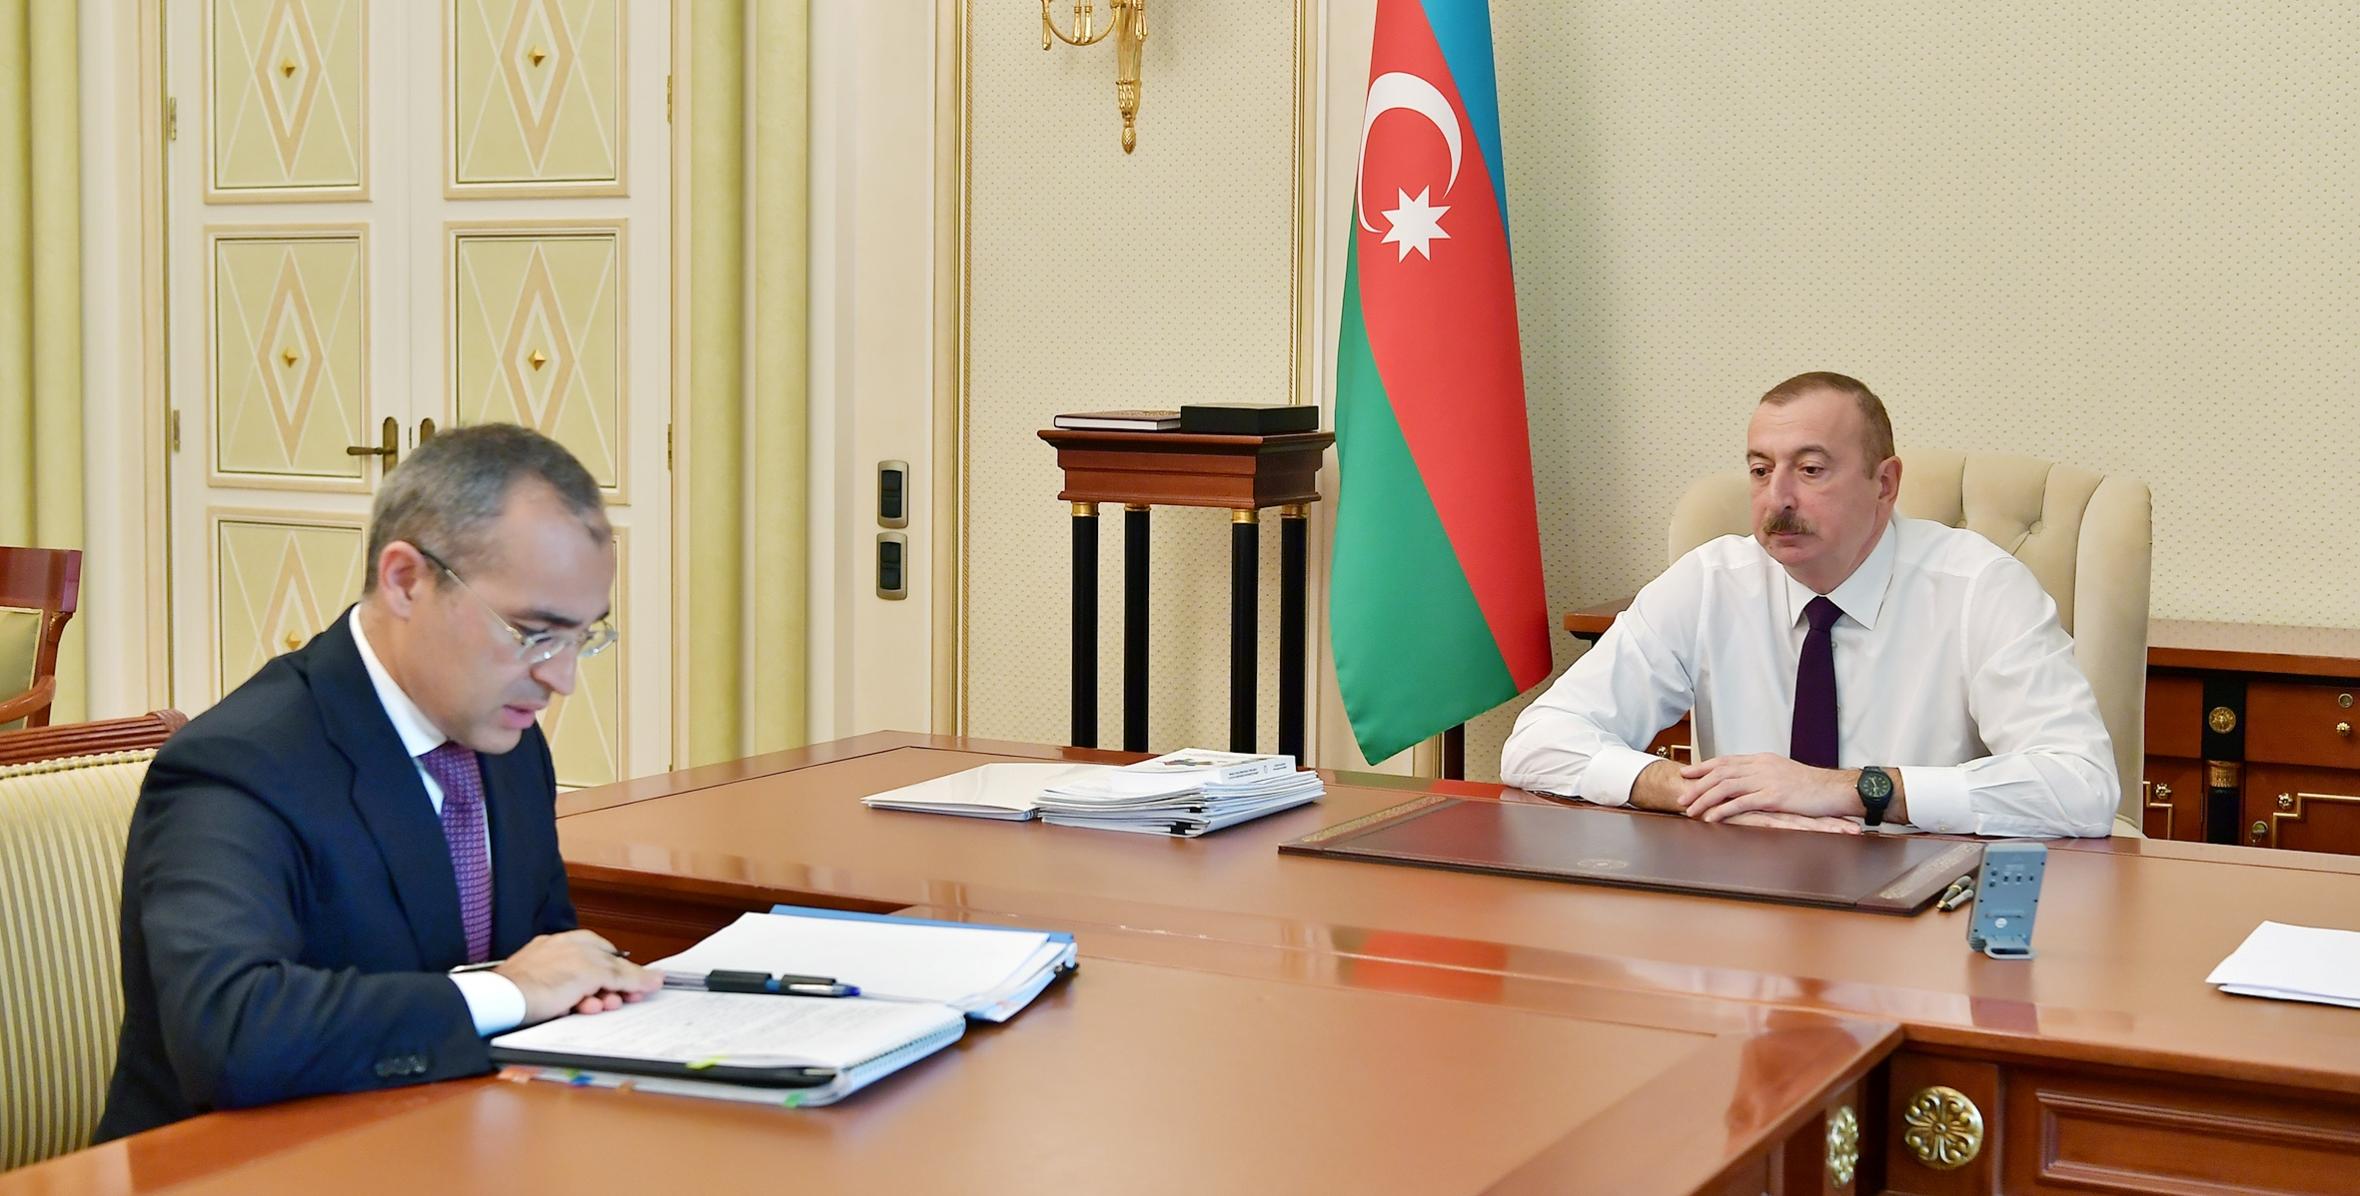 Ilham Aliyev received Mikayil Jabbarov in connection with his appointment to new post